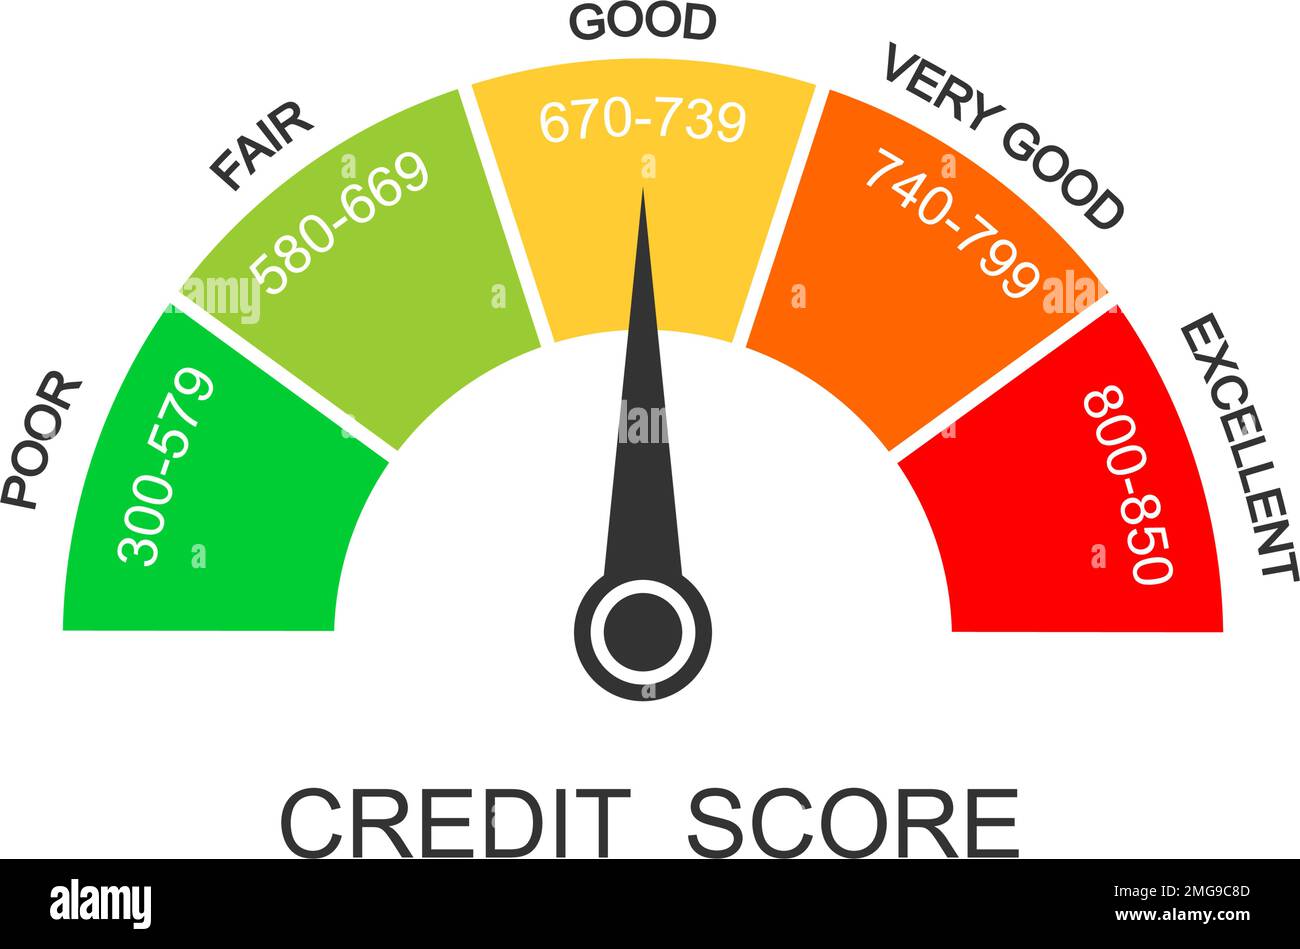 https://c8.alamy.com/comp/2MG9C8D/credit-score-ranges-icon-loan-rating-scale-with-levels-from-poor-to-excellent-fico-report-dashboard-with-arrow-isolated-on-white-background-financial-capacity-assessment-vector-flat-illustration-2MG9C8D.jpg